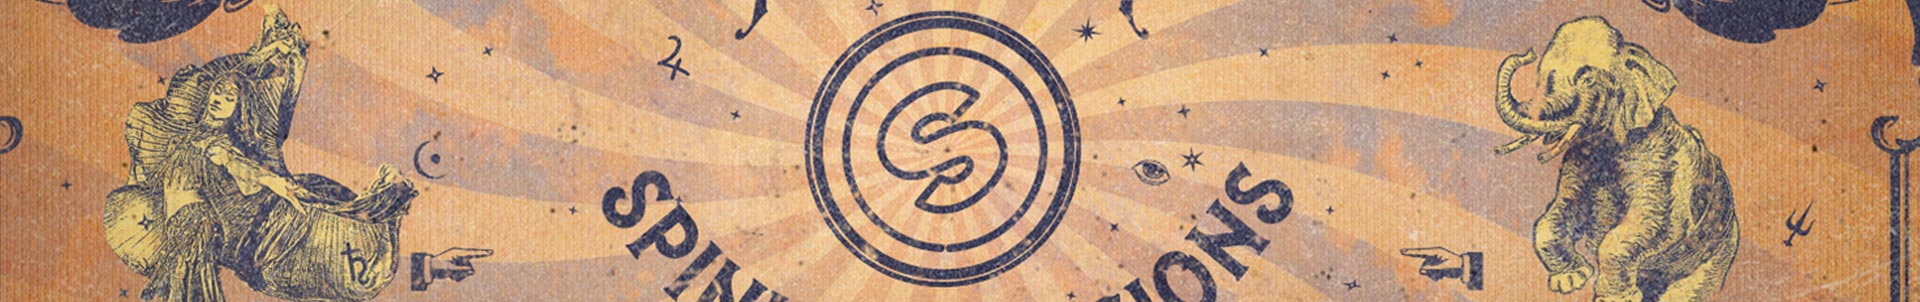 Spinnin' Sessions announces its Tomorrowland lineup